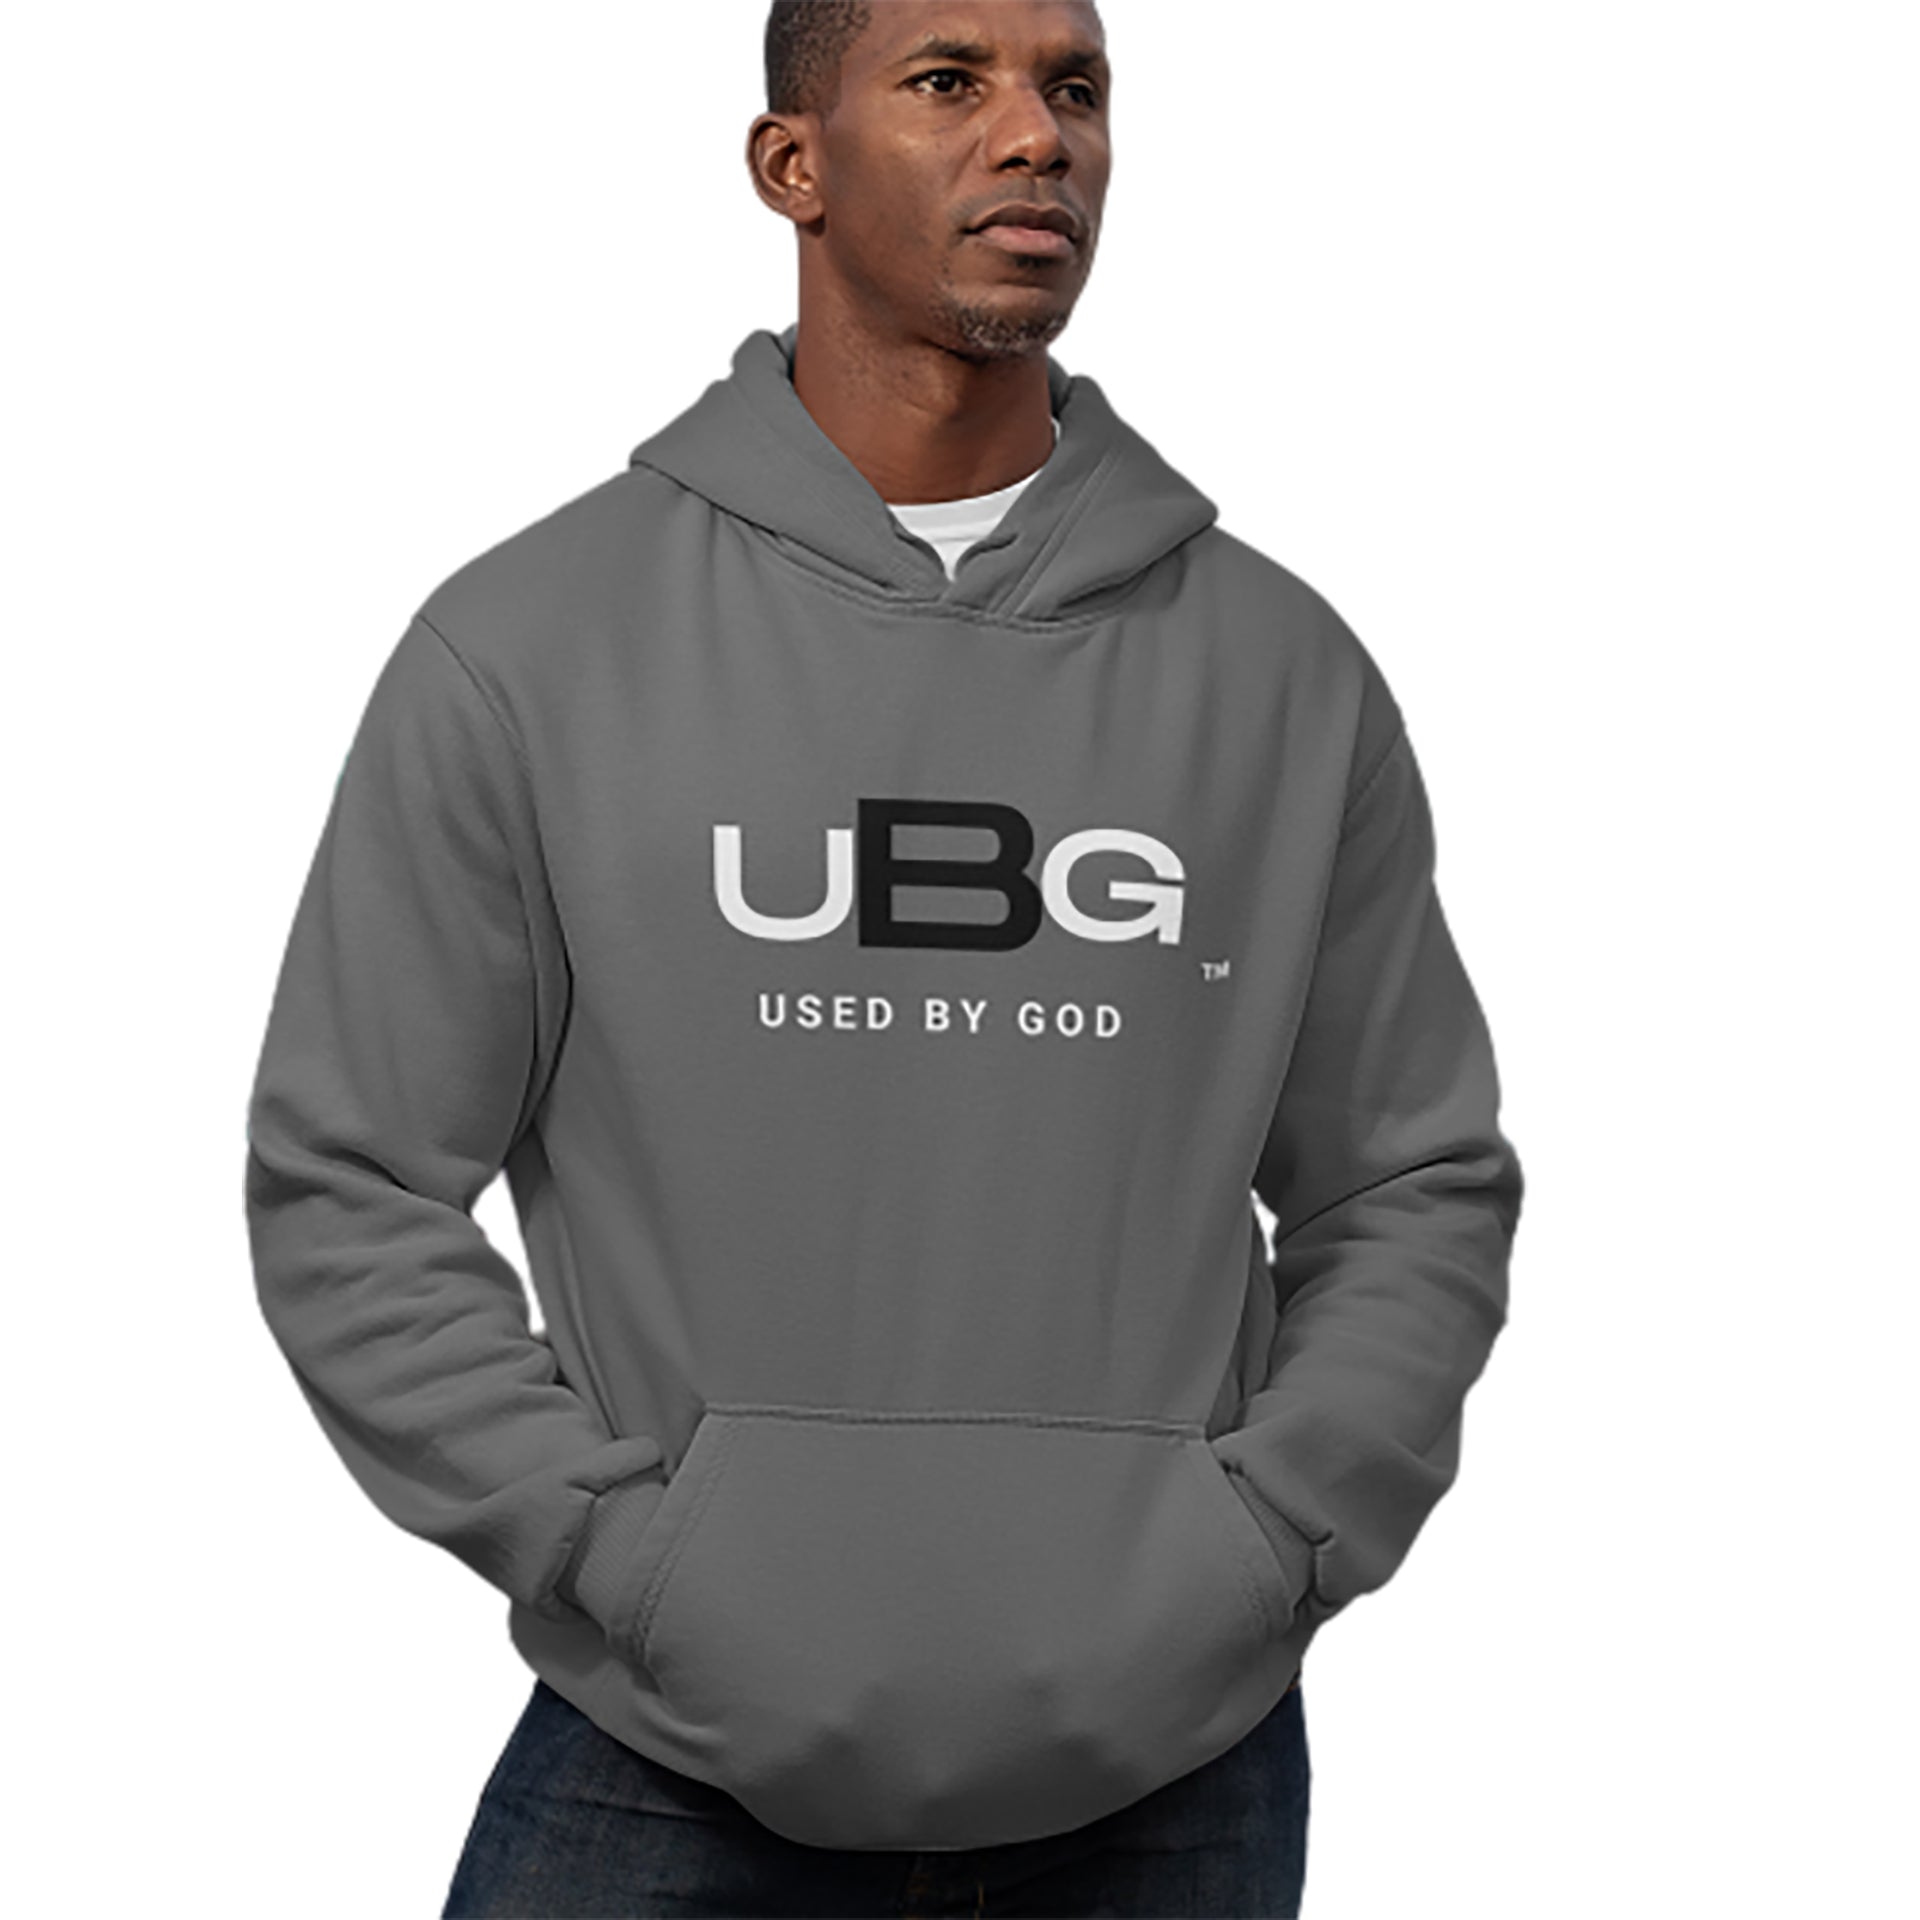 Nfin8 Divine Mission - 'Used By God' Hoodie in Gray